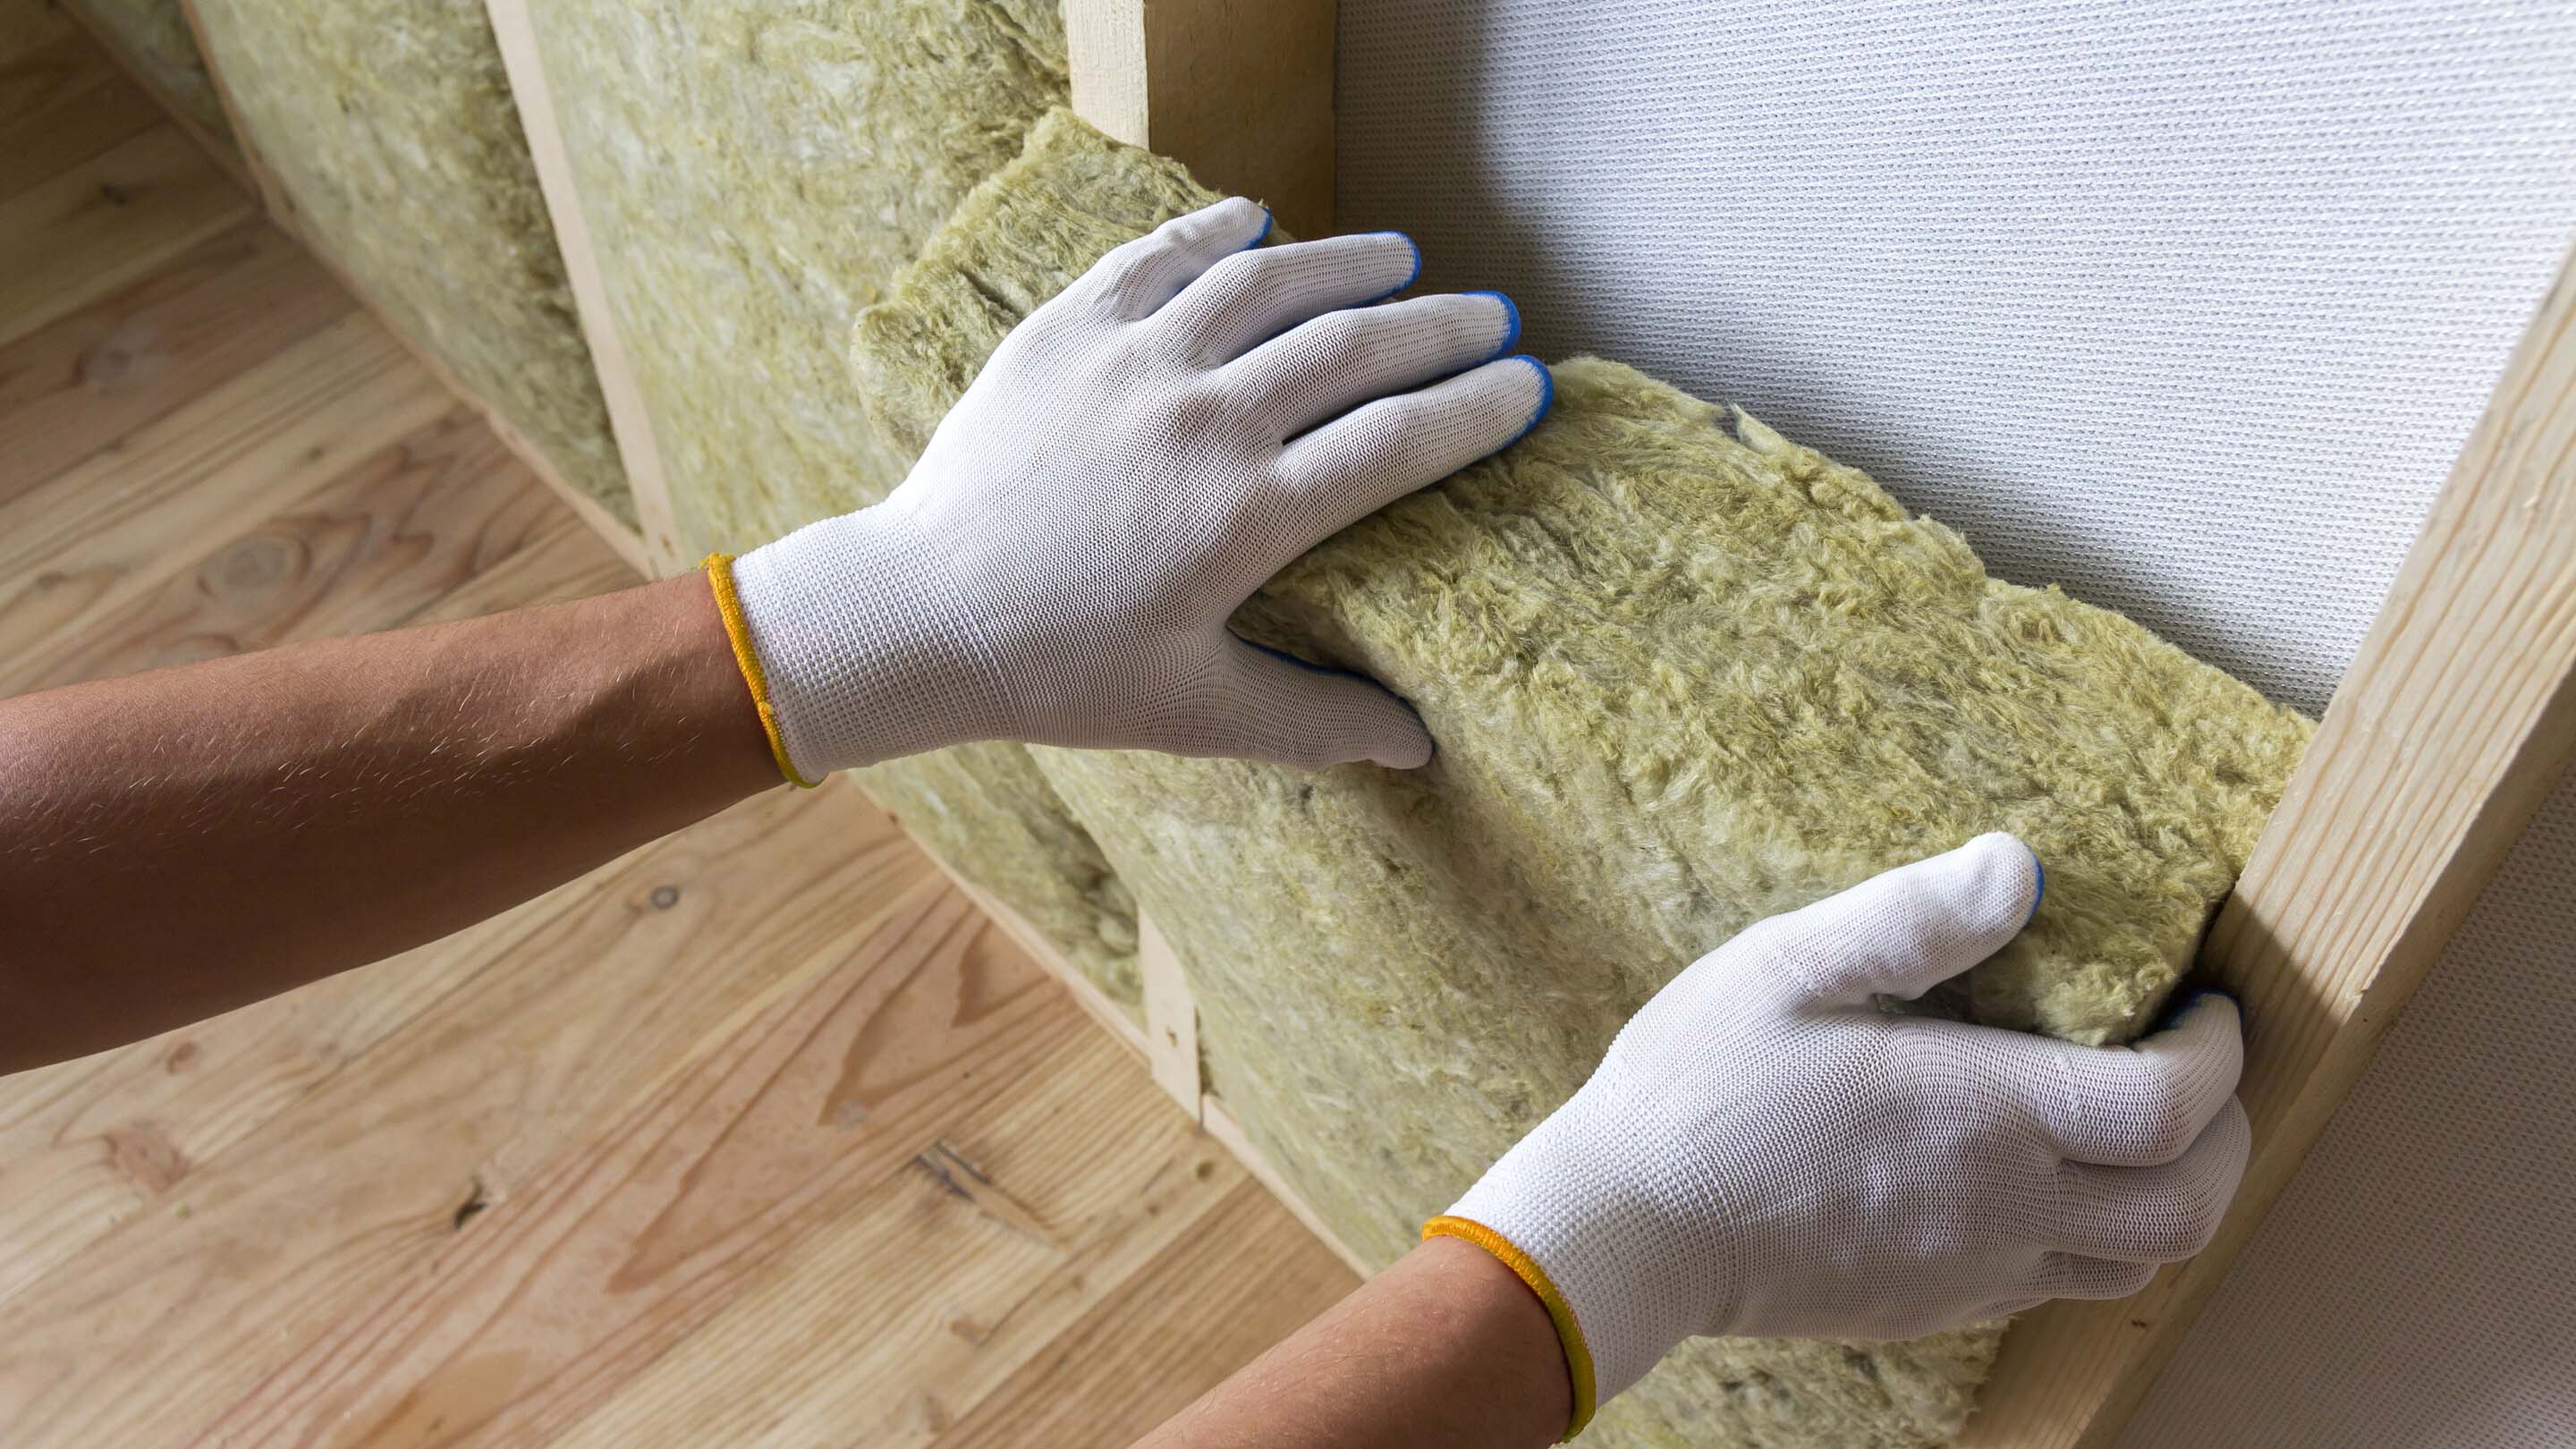 Insulation being installed in a home